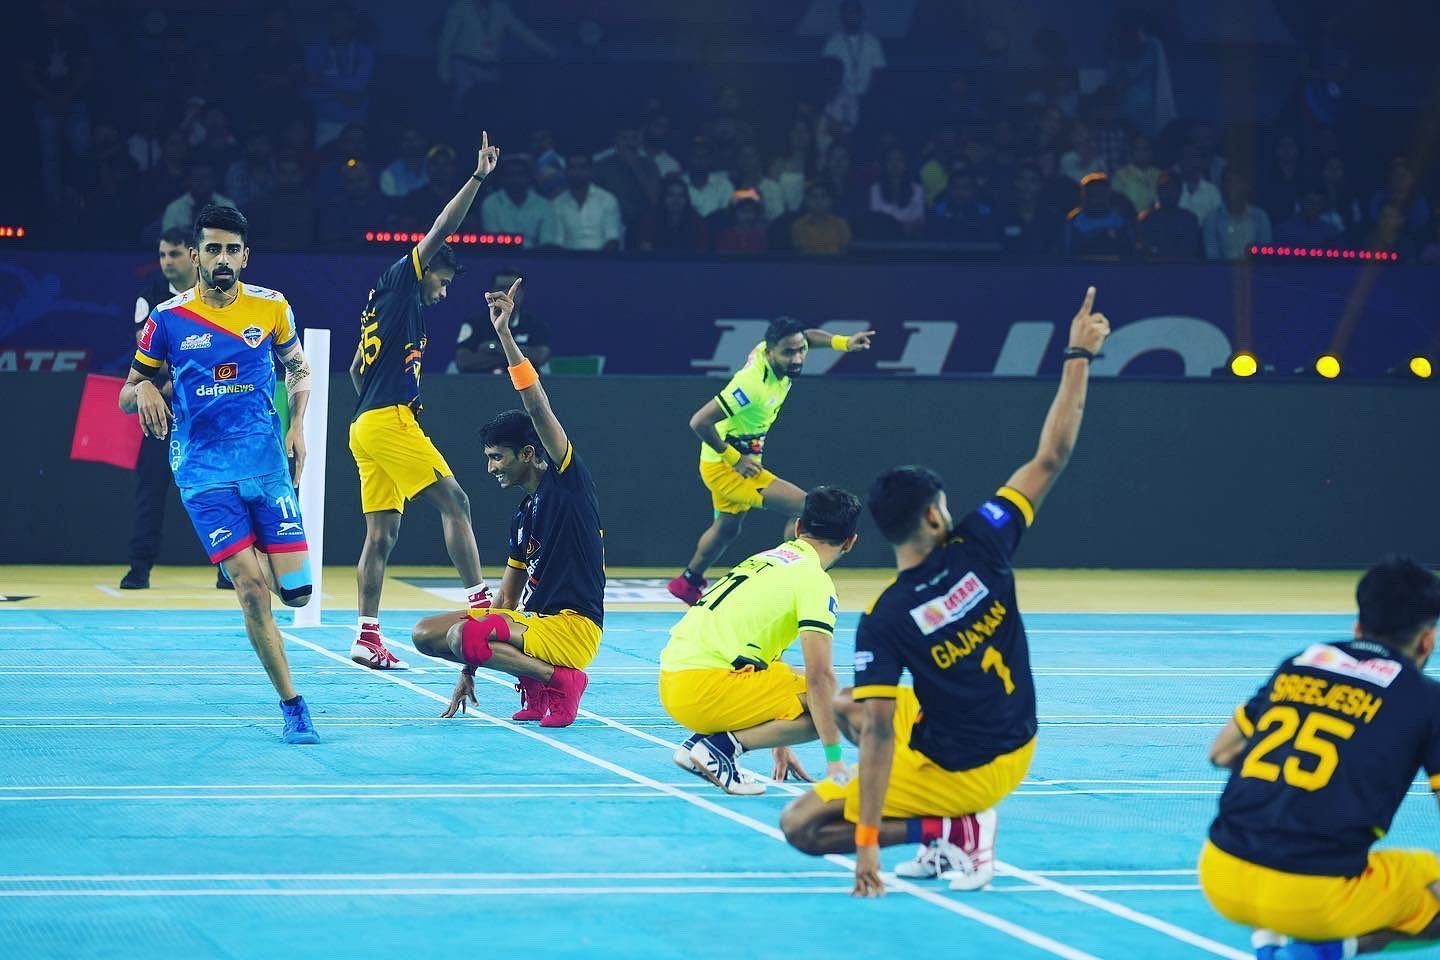 The Mumbai Khiladis have bounced back in style after starting their Ultimate Kho Kho 2022 campaign with four consecutive losses (Image: UKK)